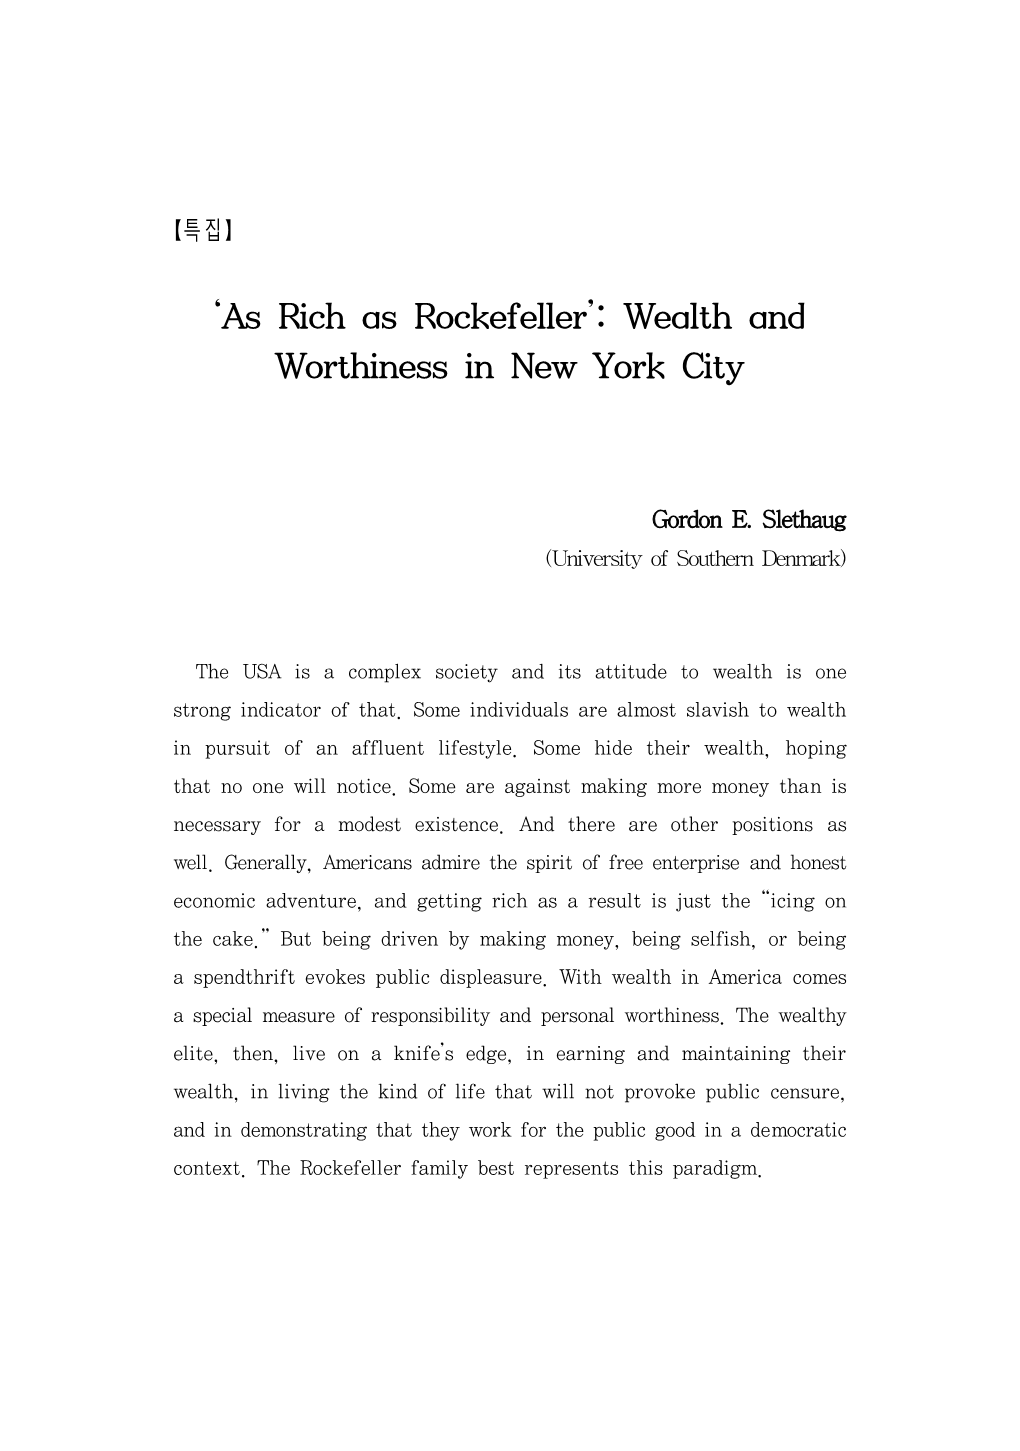 As Rich As Rockefeller’: Wealth and Worthiness in New York City